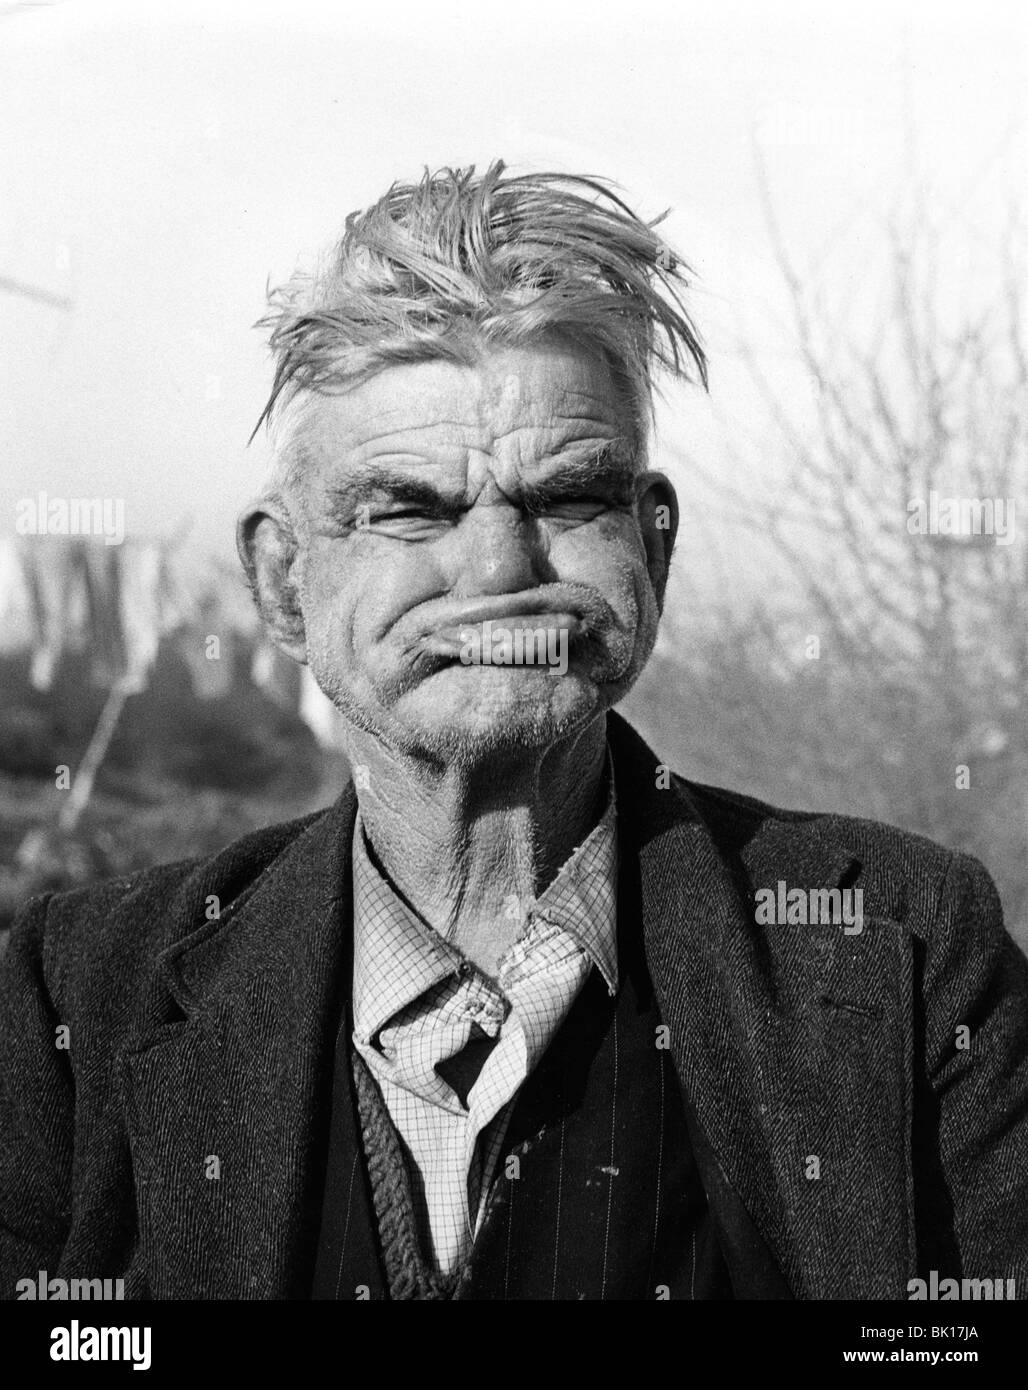 Gipsy pulling a 'gurney face', Lewes, Sussex, 1964. Stock Photo